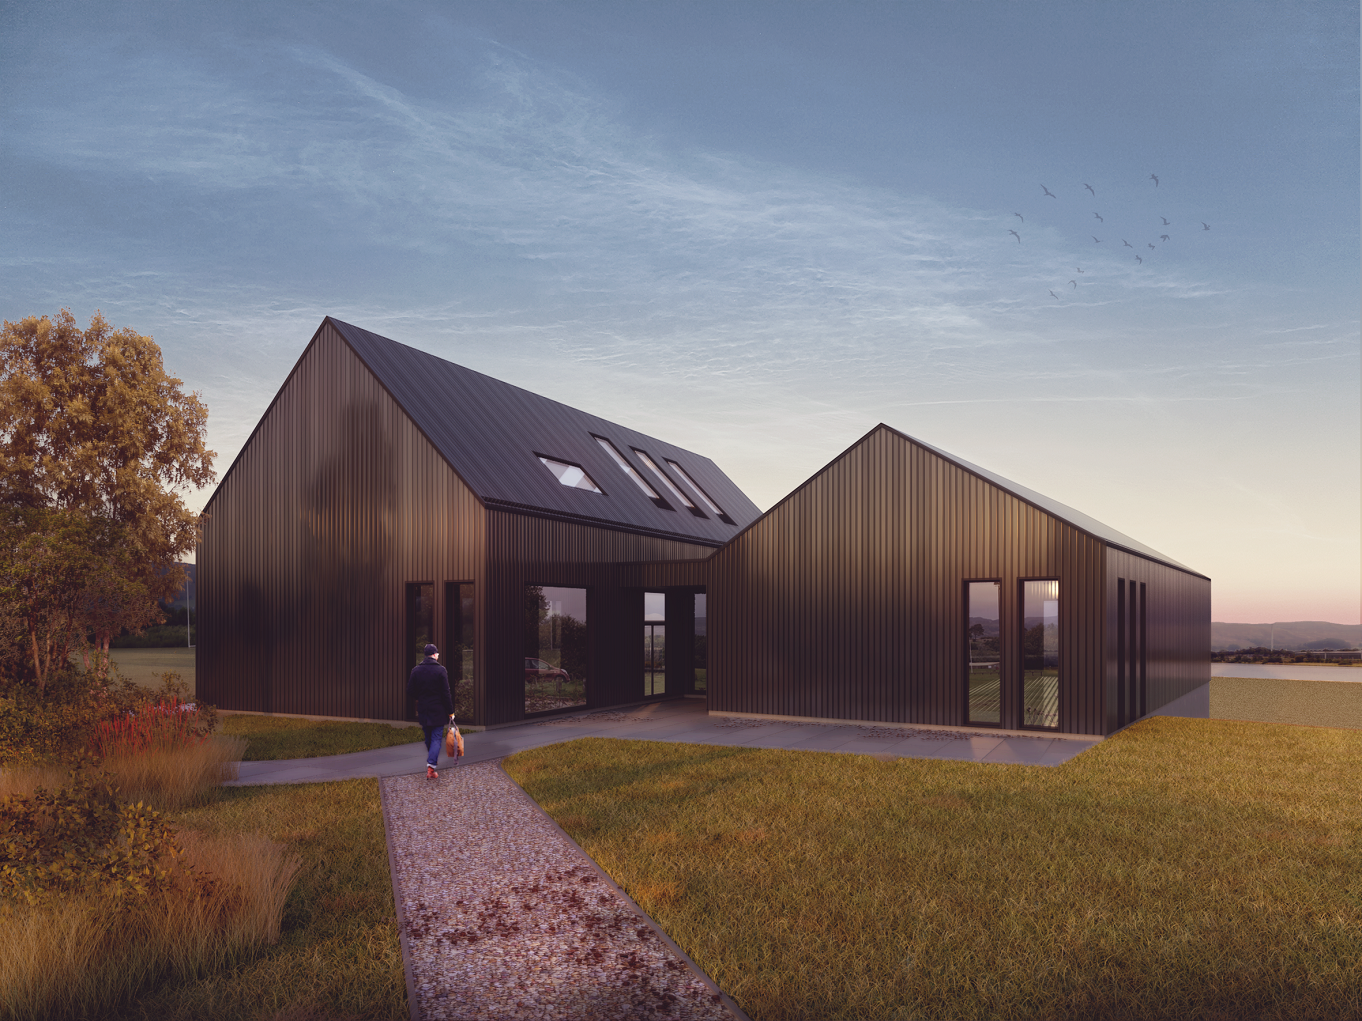 Collective Architecture gains planning approval for Glengarnock facility